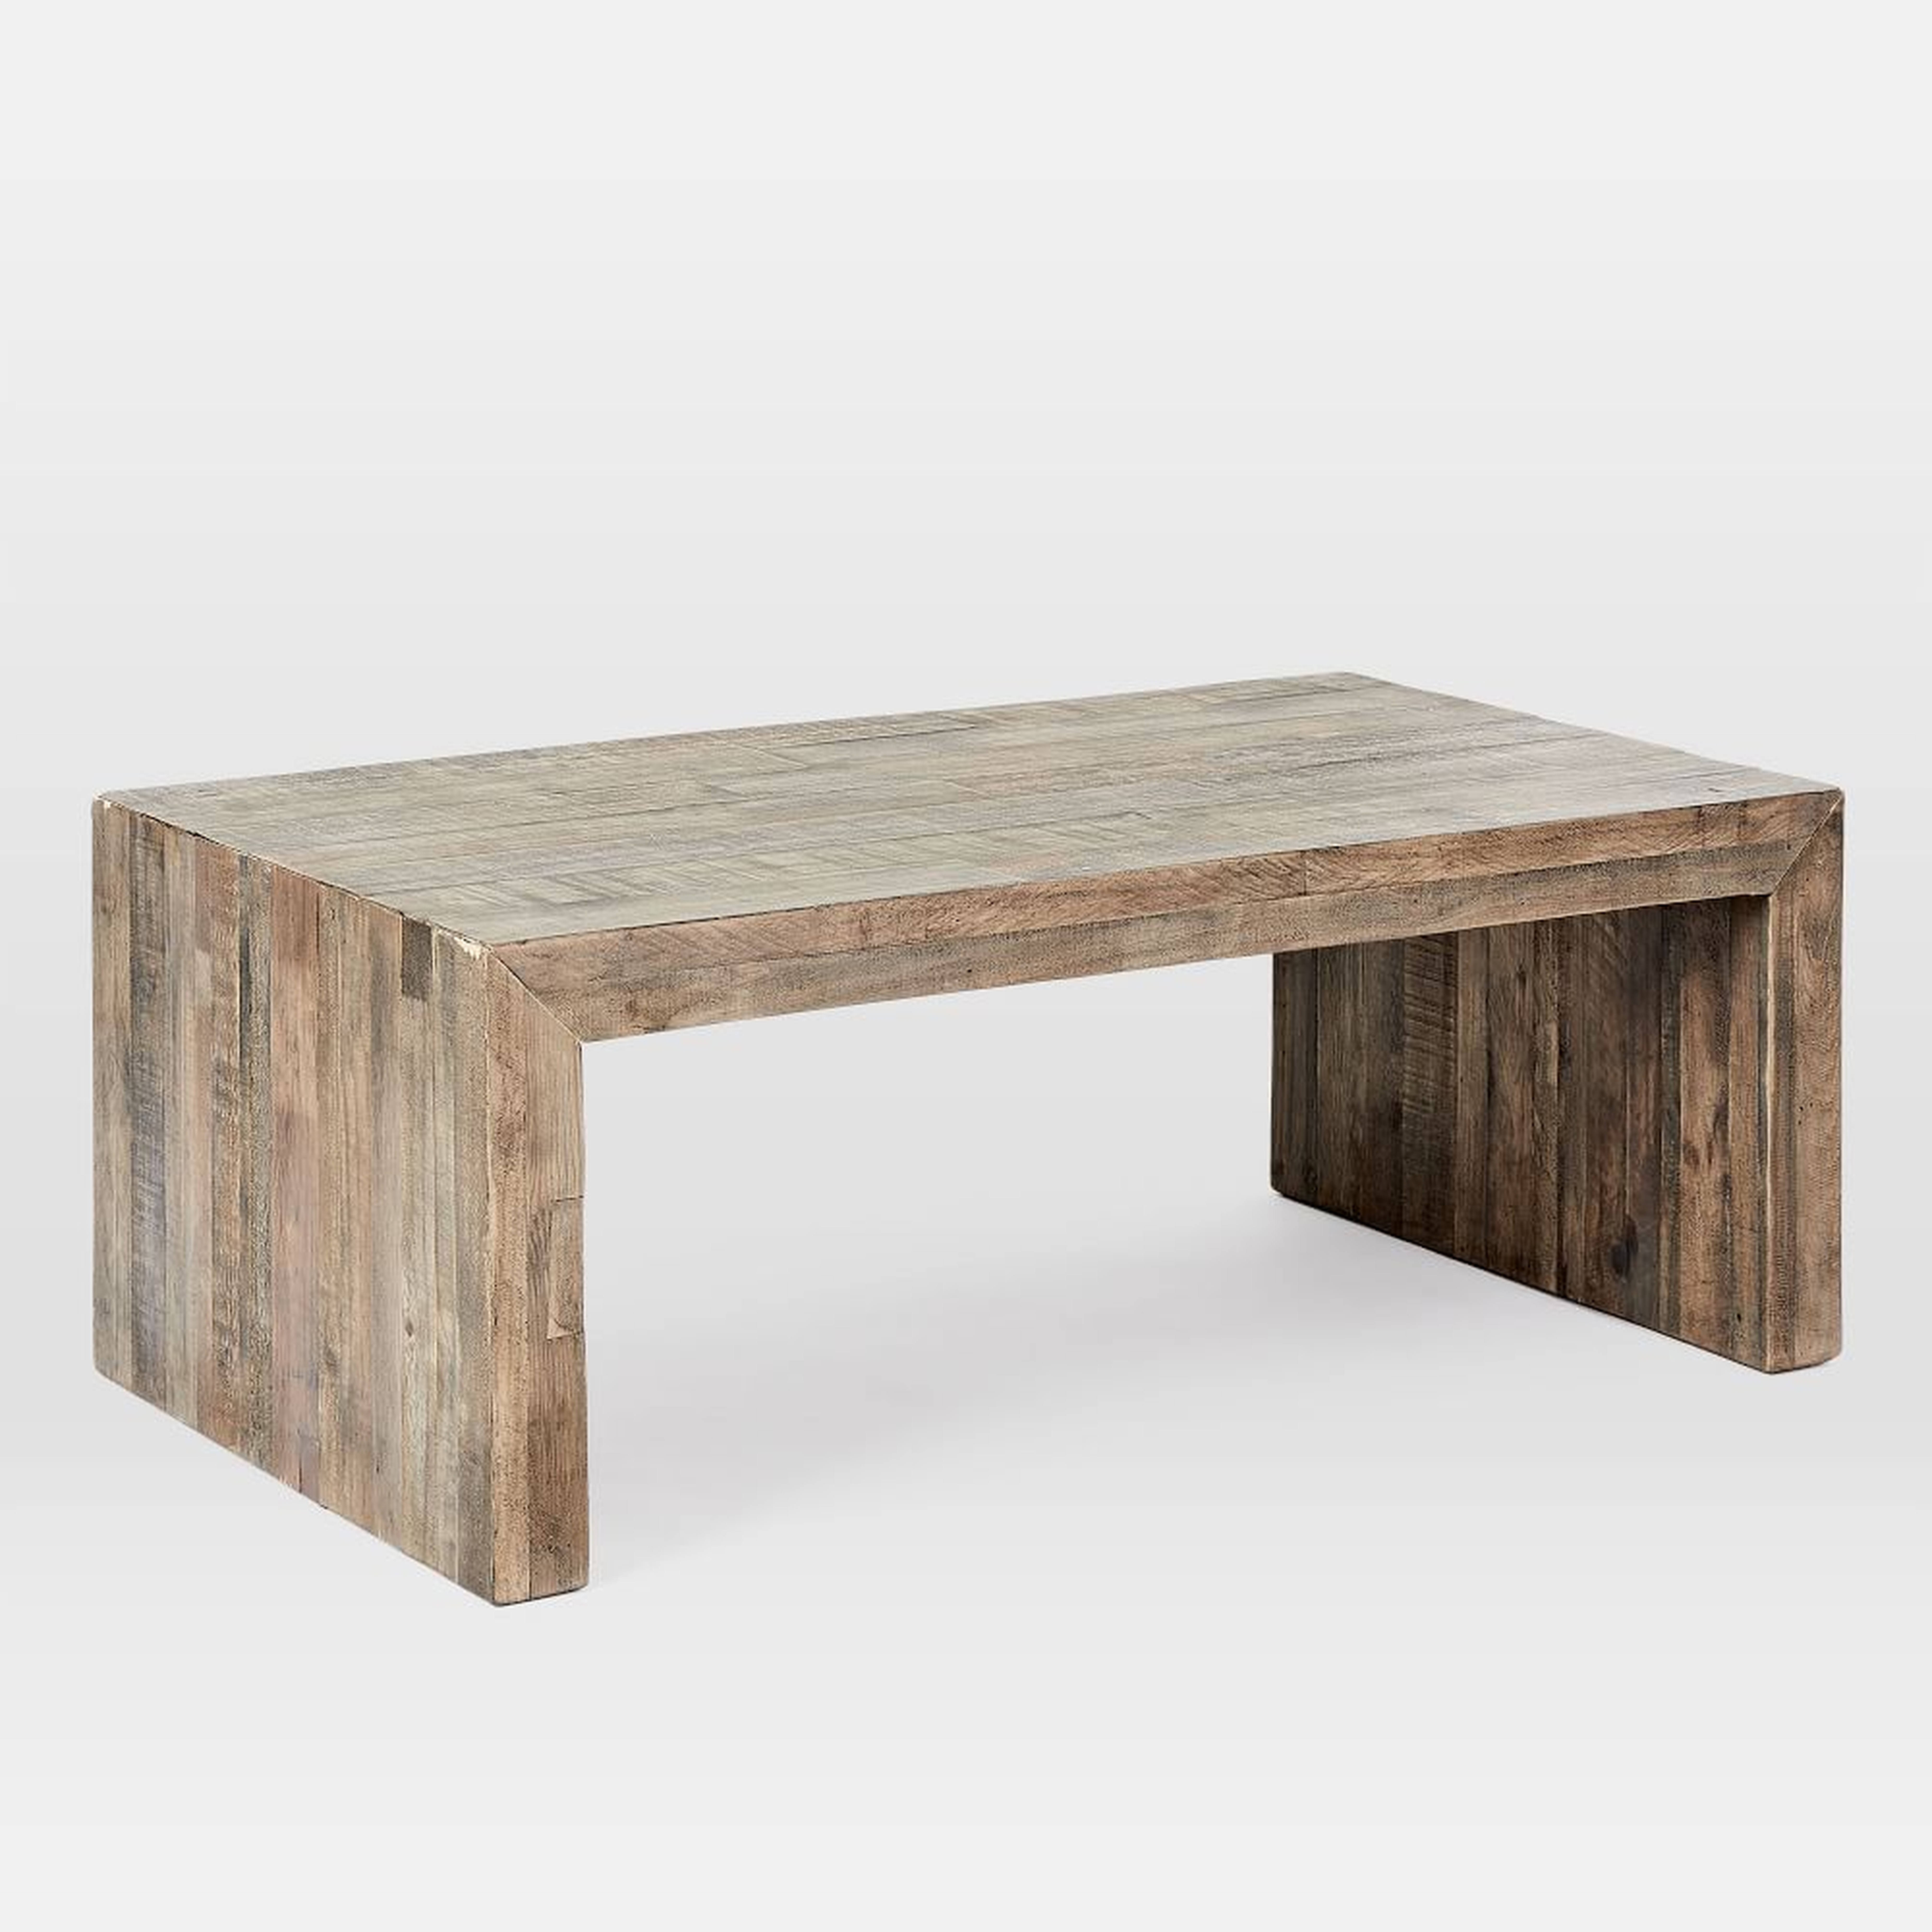 Emmerson(R) 42" Rectangle Coffee Table, Stone Gray - West Elm